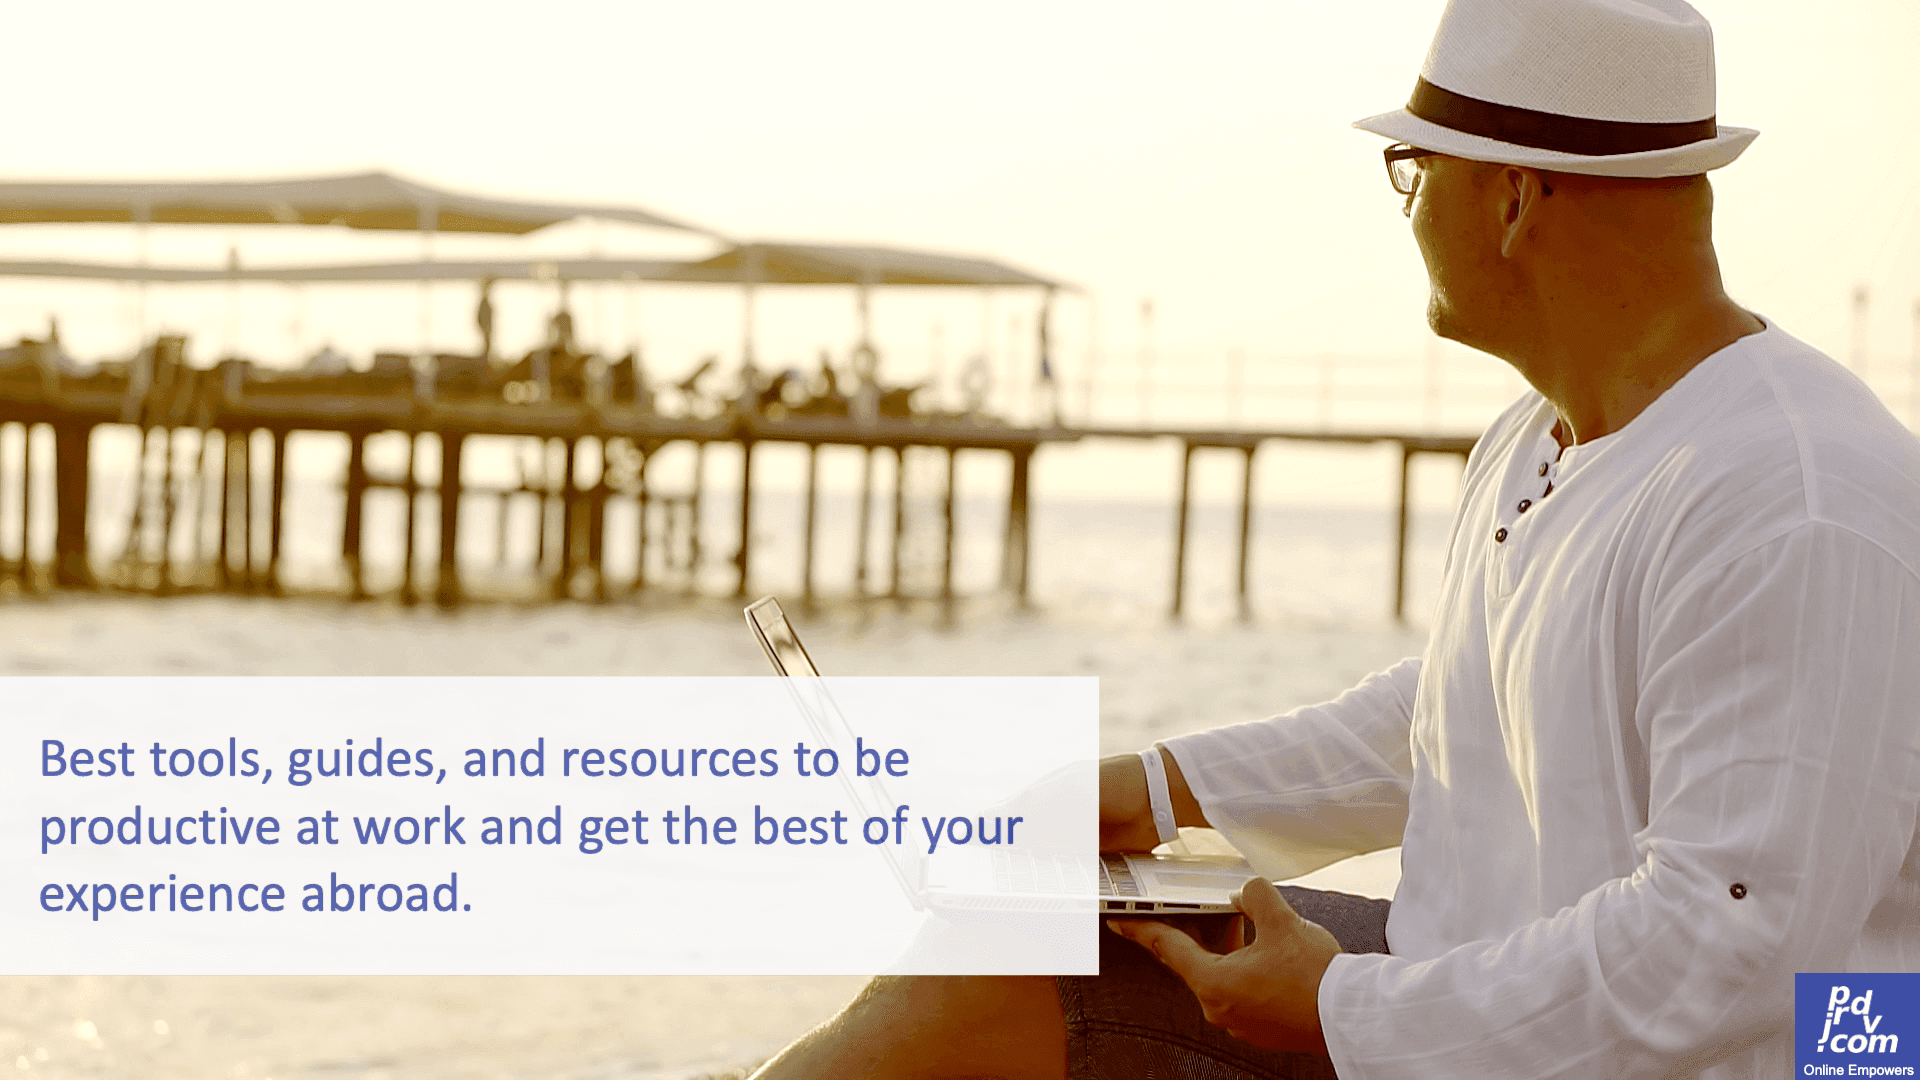 Best tools, guides, and resouces to be productive at work and geet the best of your experience abroad.